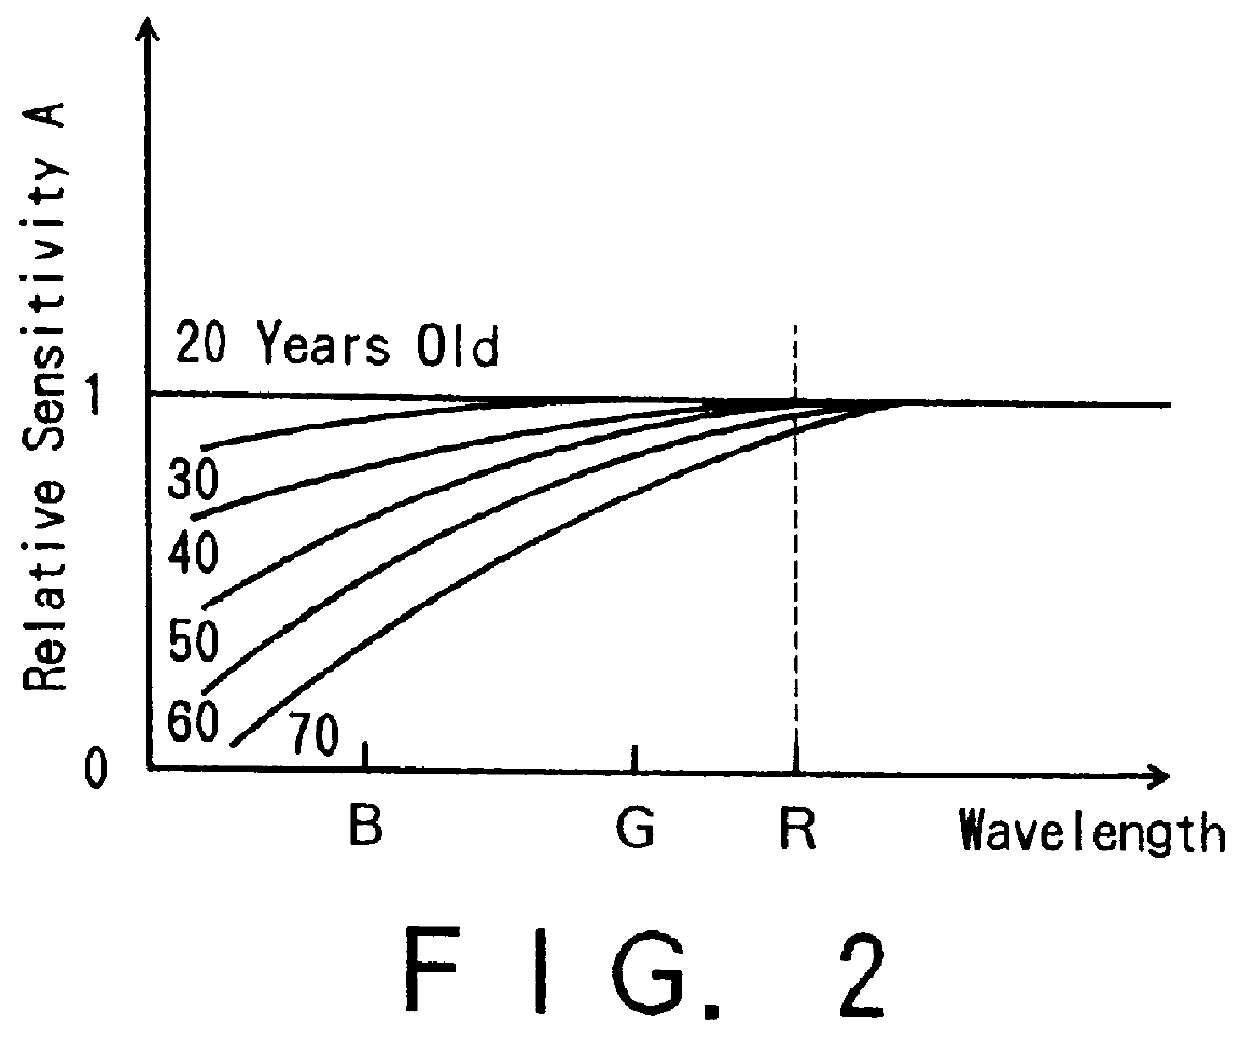 Image compensating device based on age-related characteristics